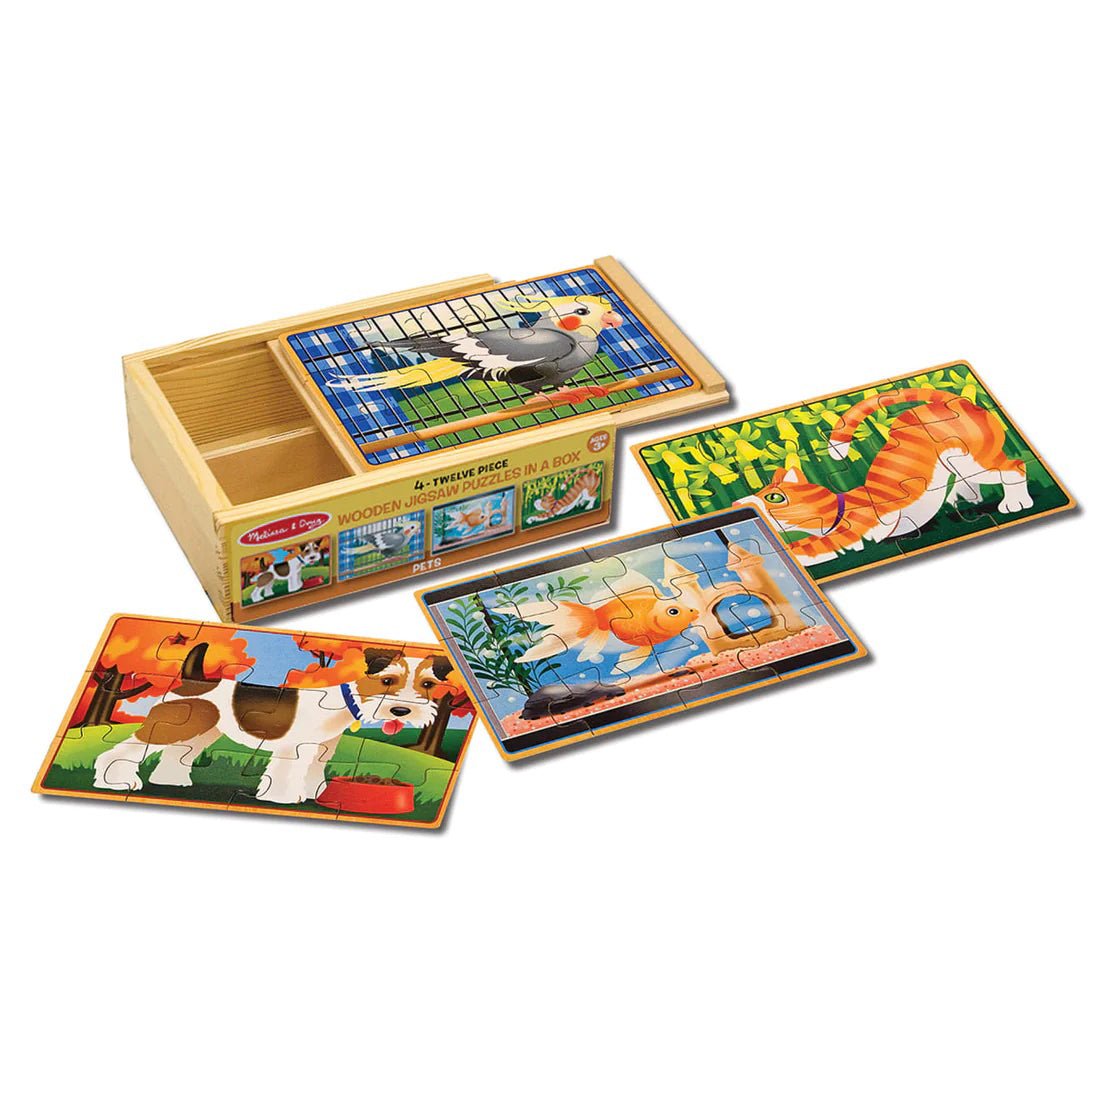 4 Pet Jigsaw puzzles in a box | Melissa and Doug